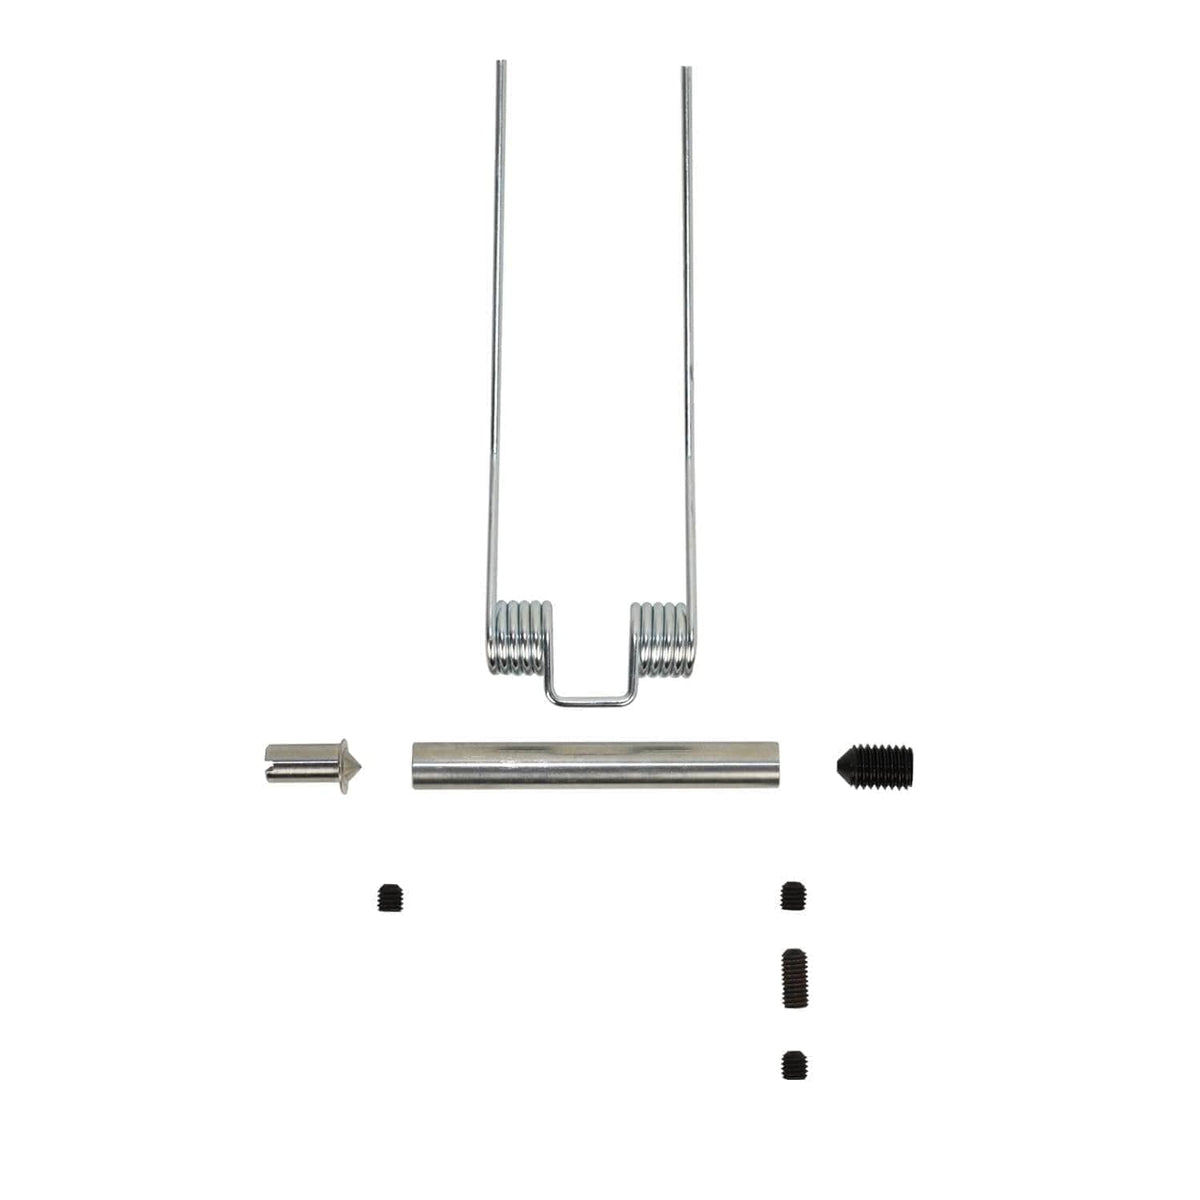 Lid hinge pin kits for use with post 1995 Aga range cookers 10mm lid hinge pin kit for a single lid